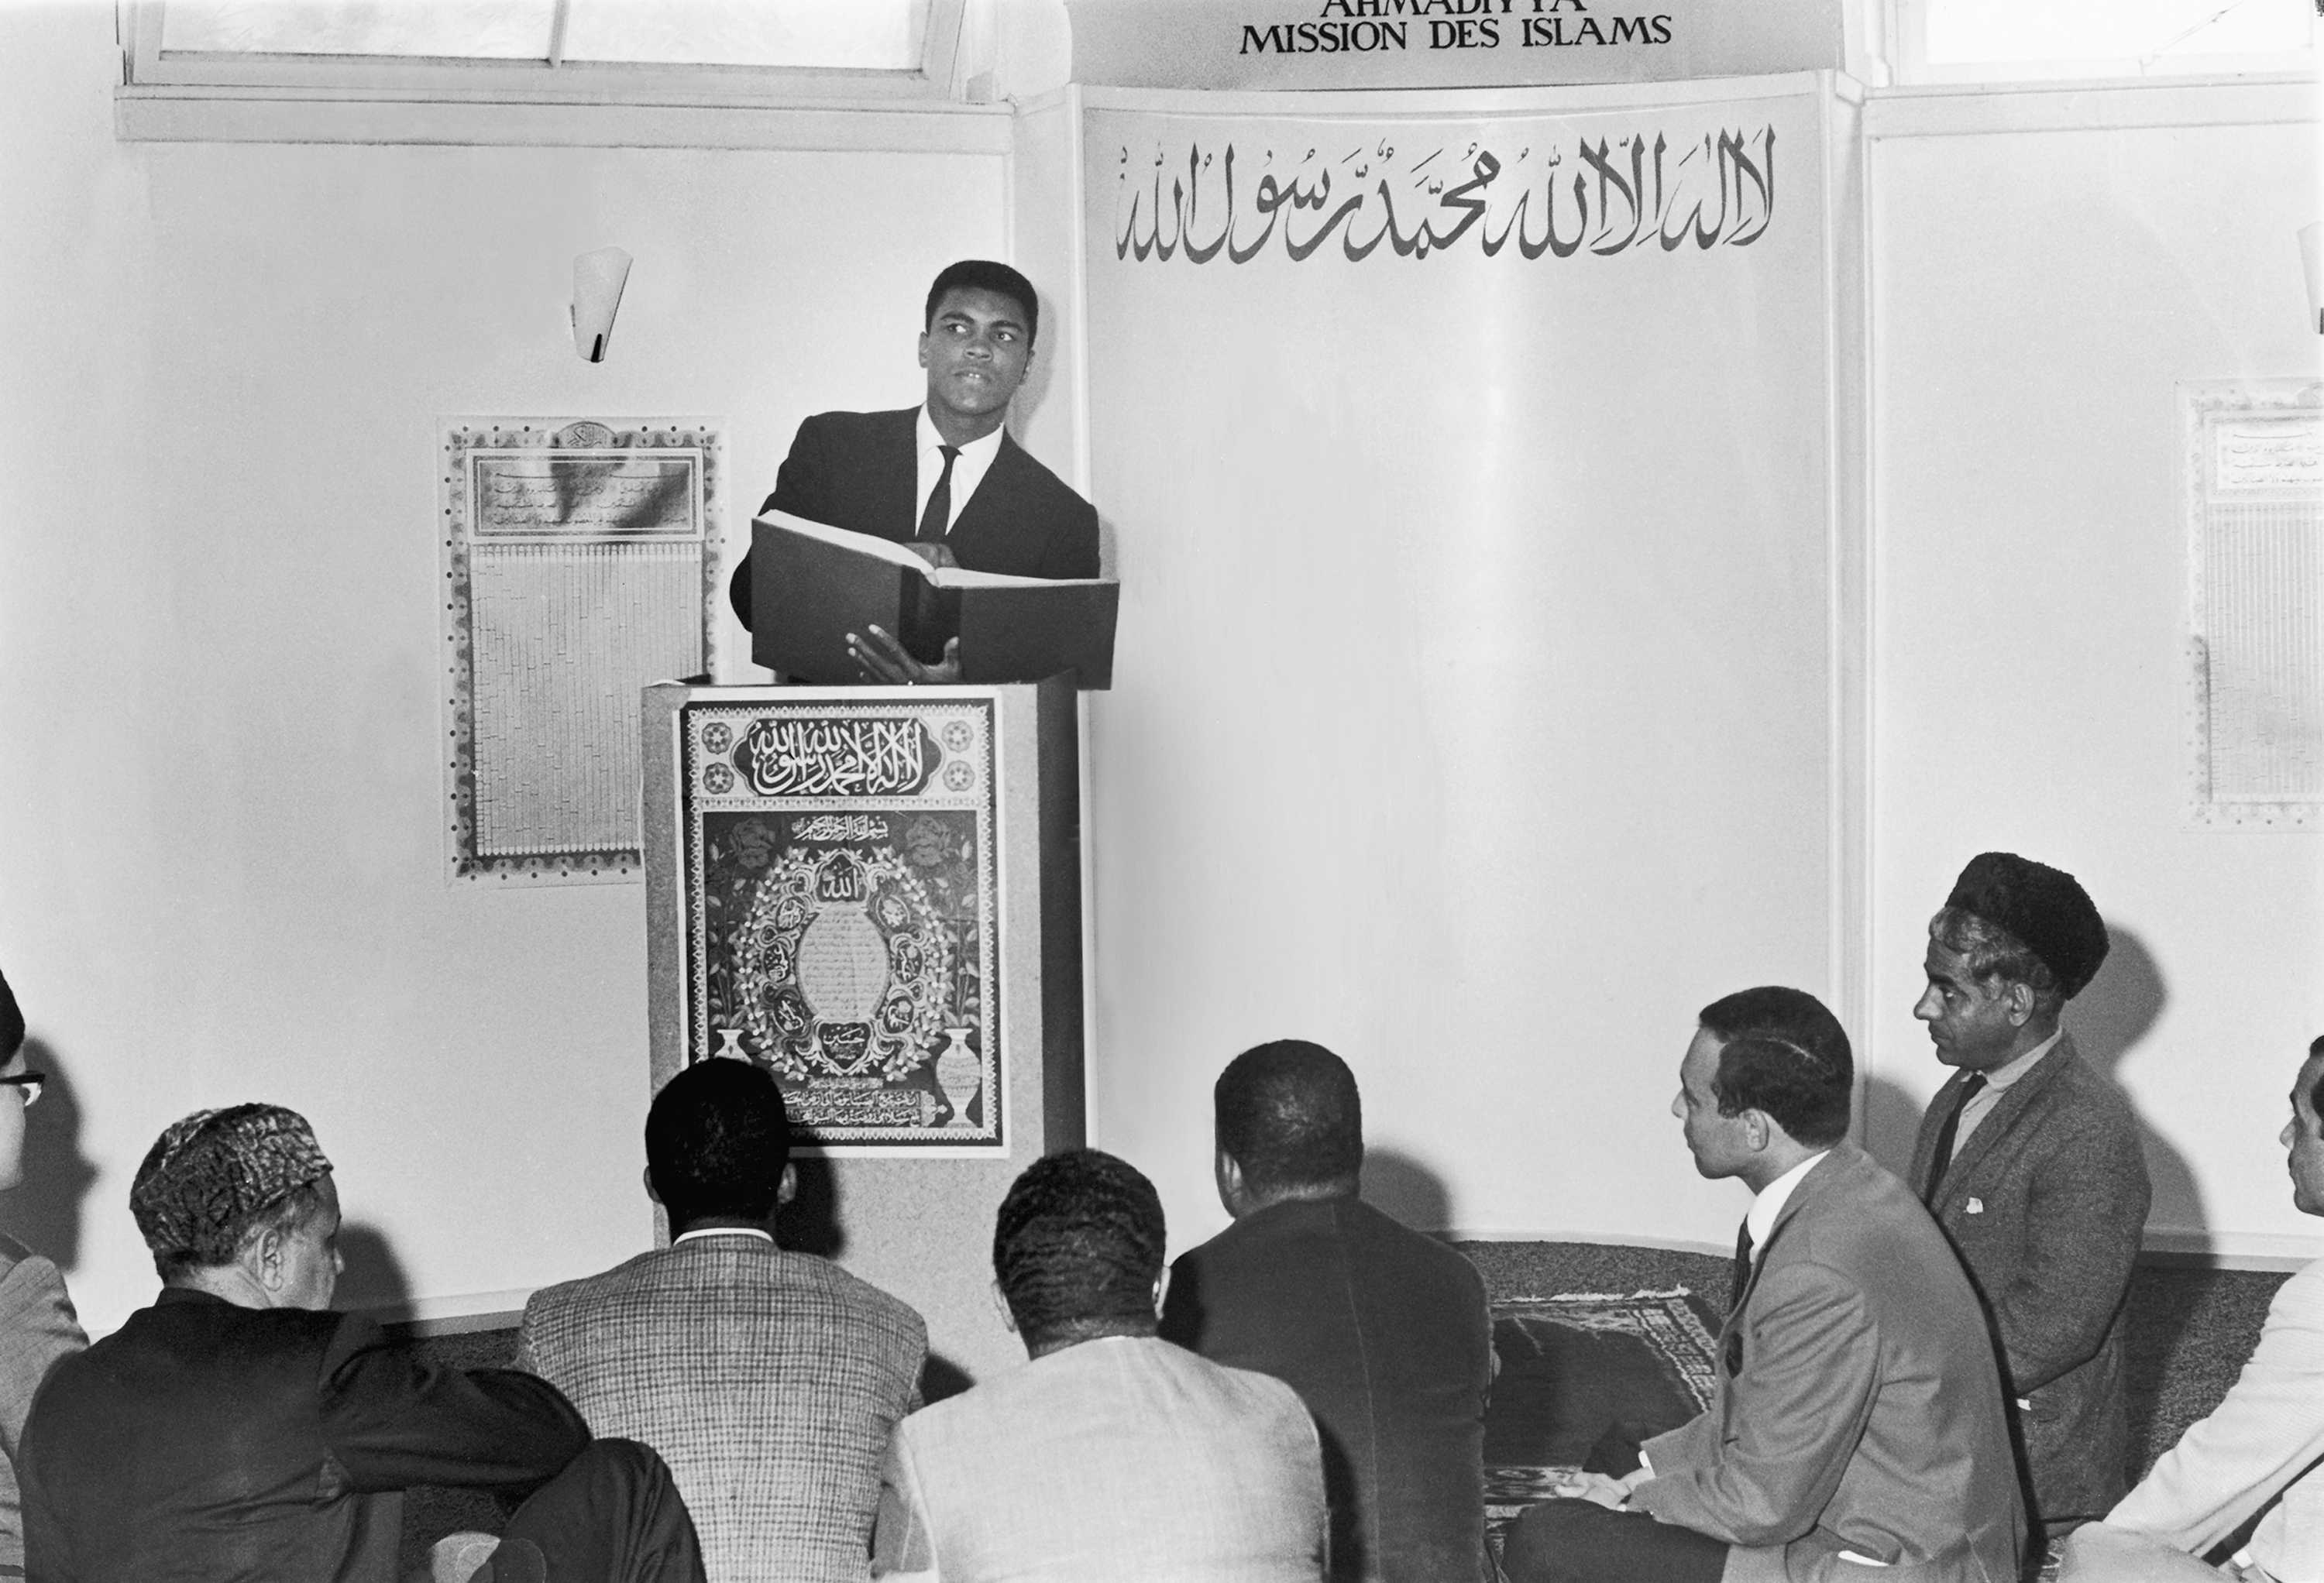 Black and white photograph of Muhammad Ali reading the Koran at a mosque